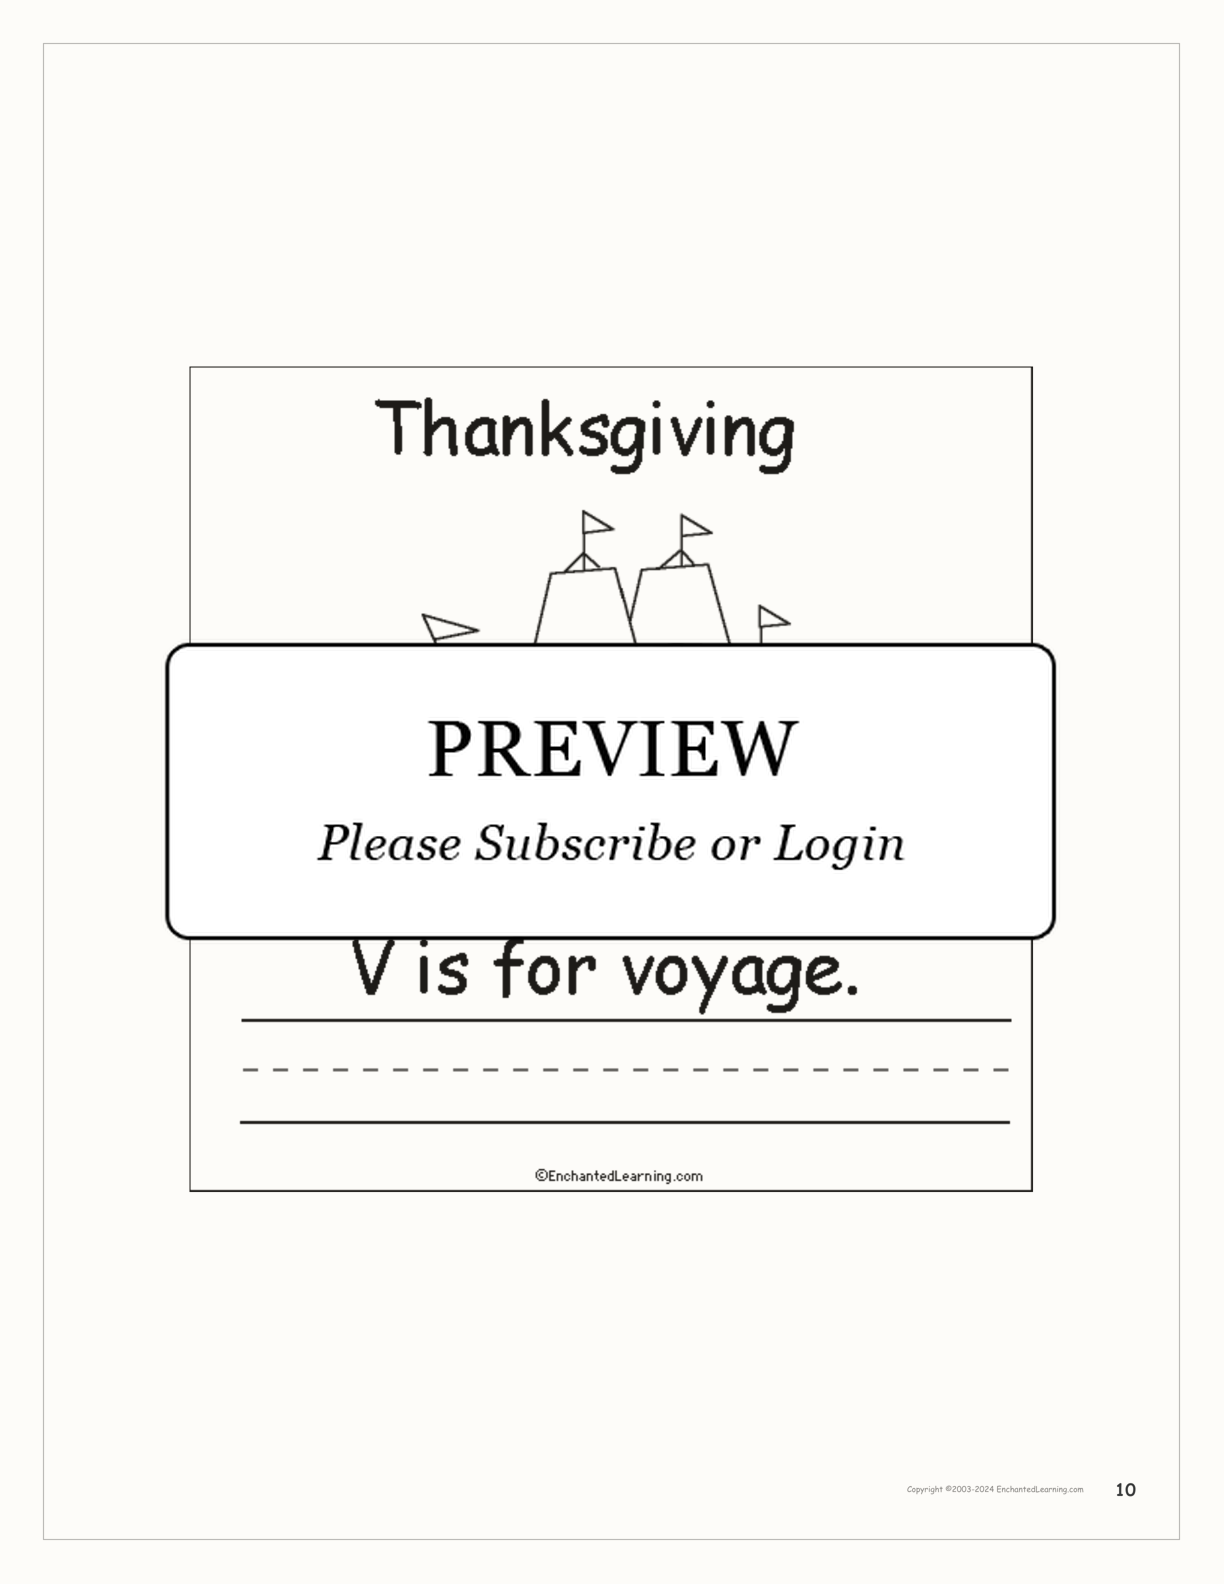 'Thanksgiving is for...' Book for Early Readers interactive printout page 10